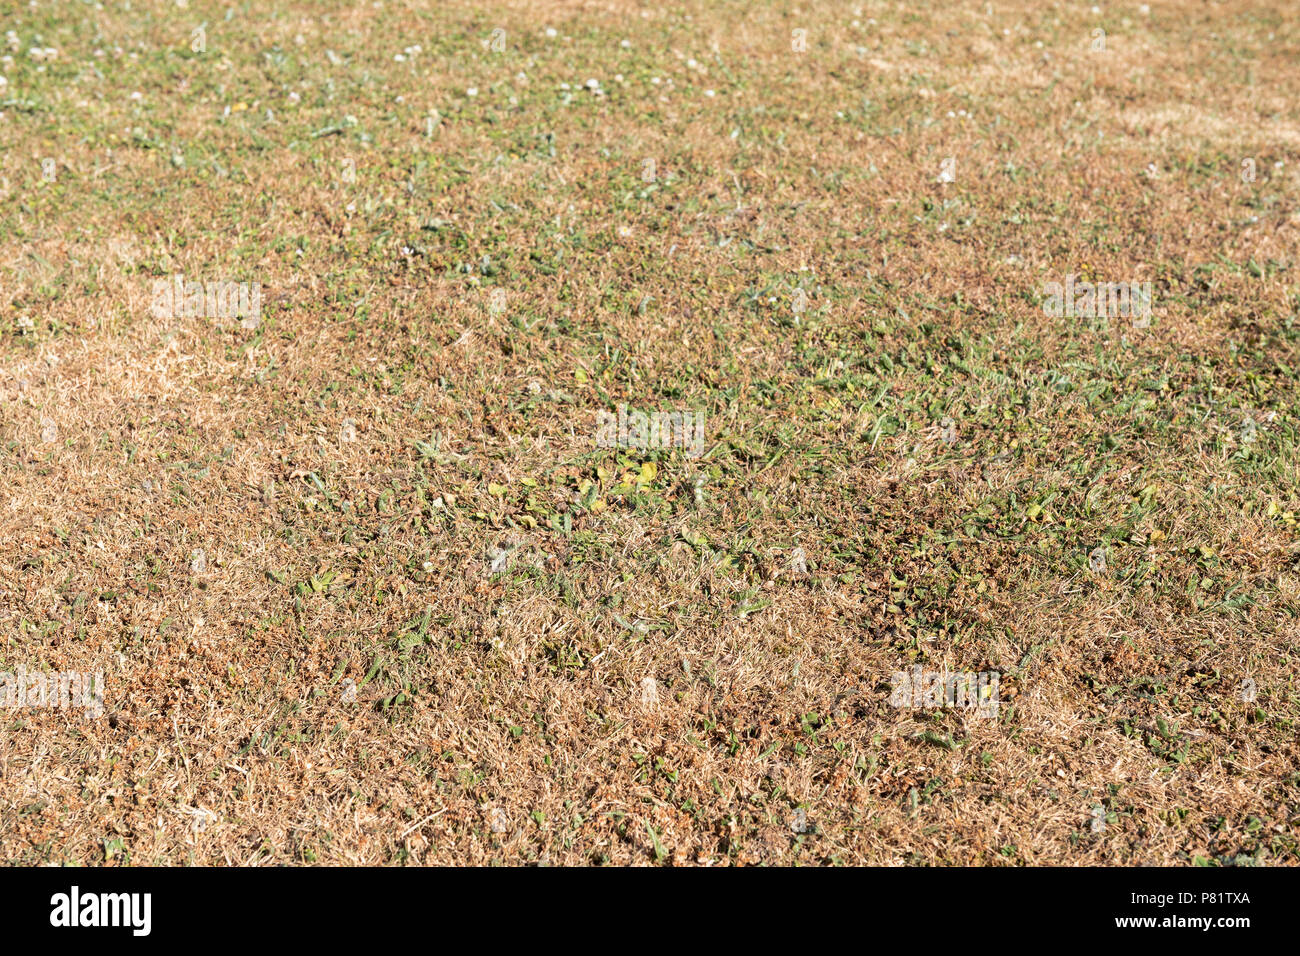 Lawn in a drought, the grass has gone brown. UK garden parched in summer. Stock Photo